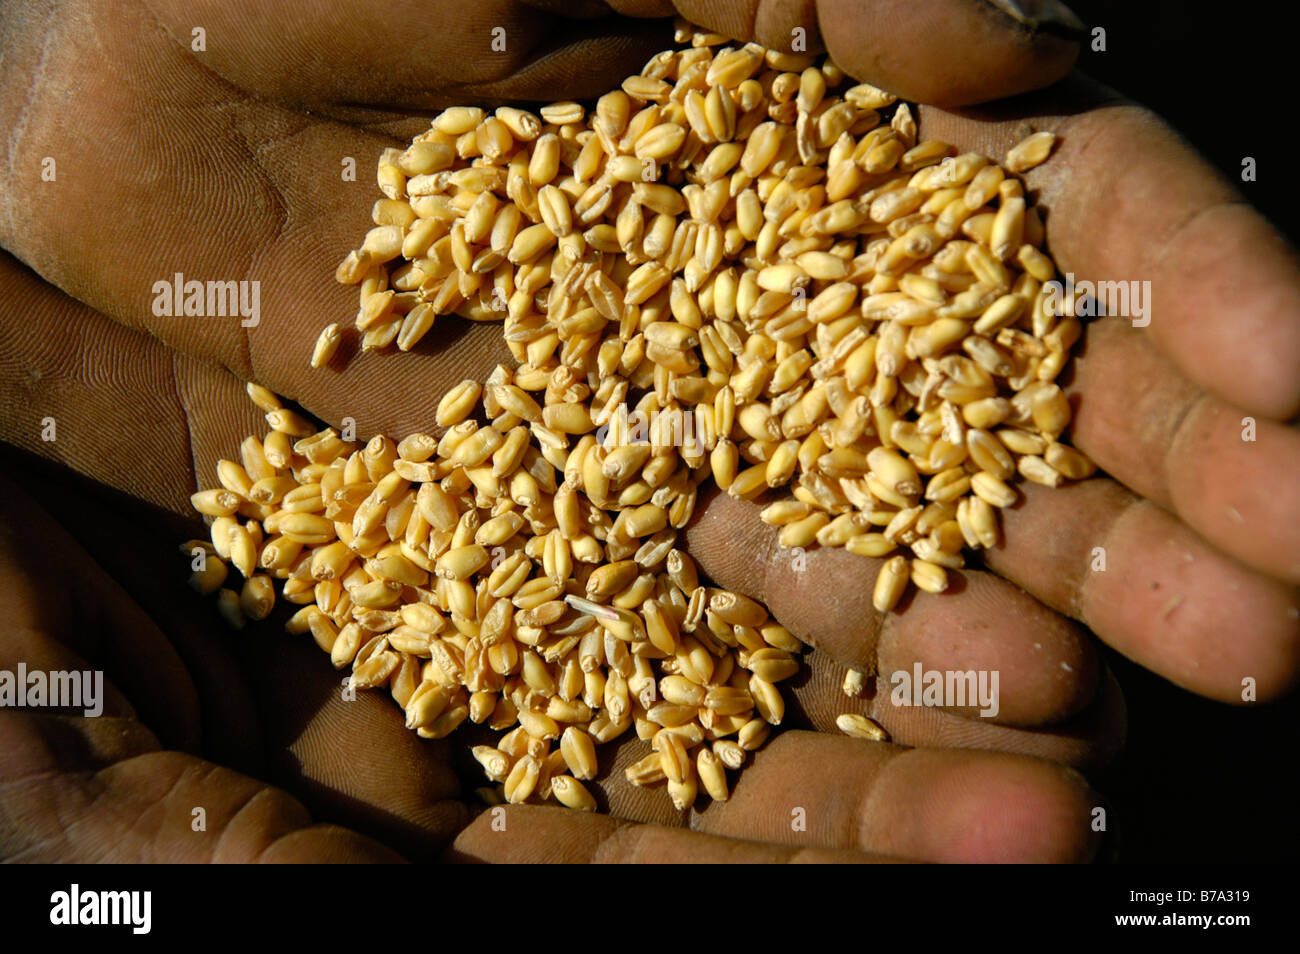 Hand holding wheat grains from a small harvest, hunger and poverty, Ethiopia, Africa Stock Photo